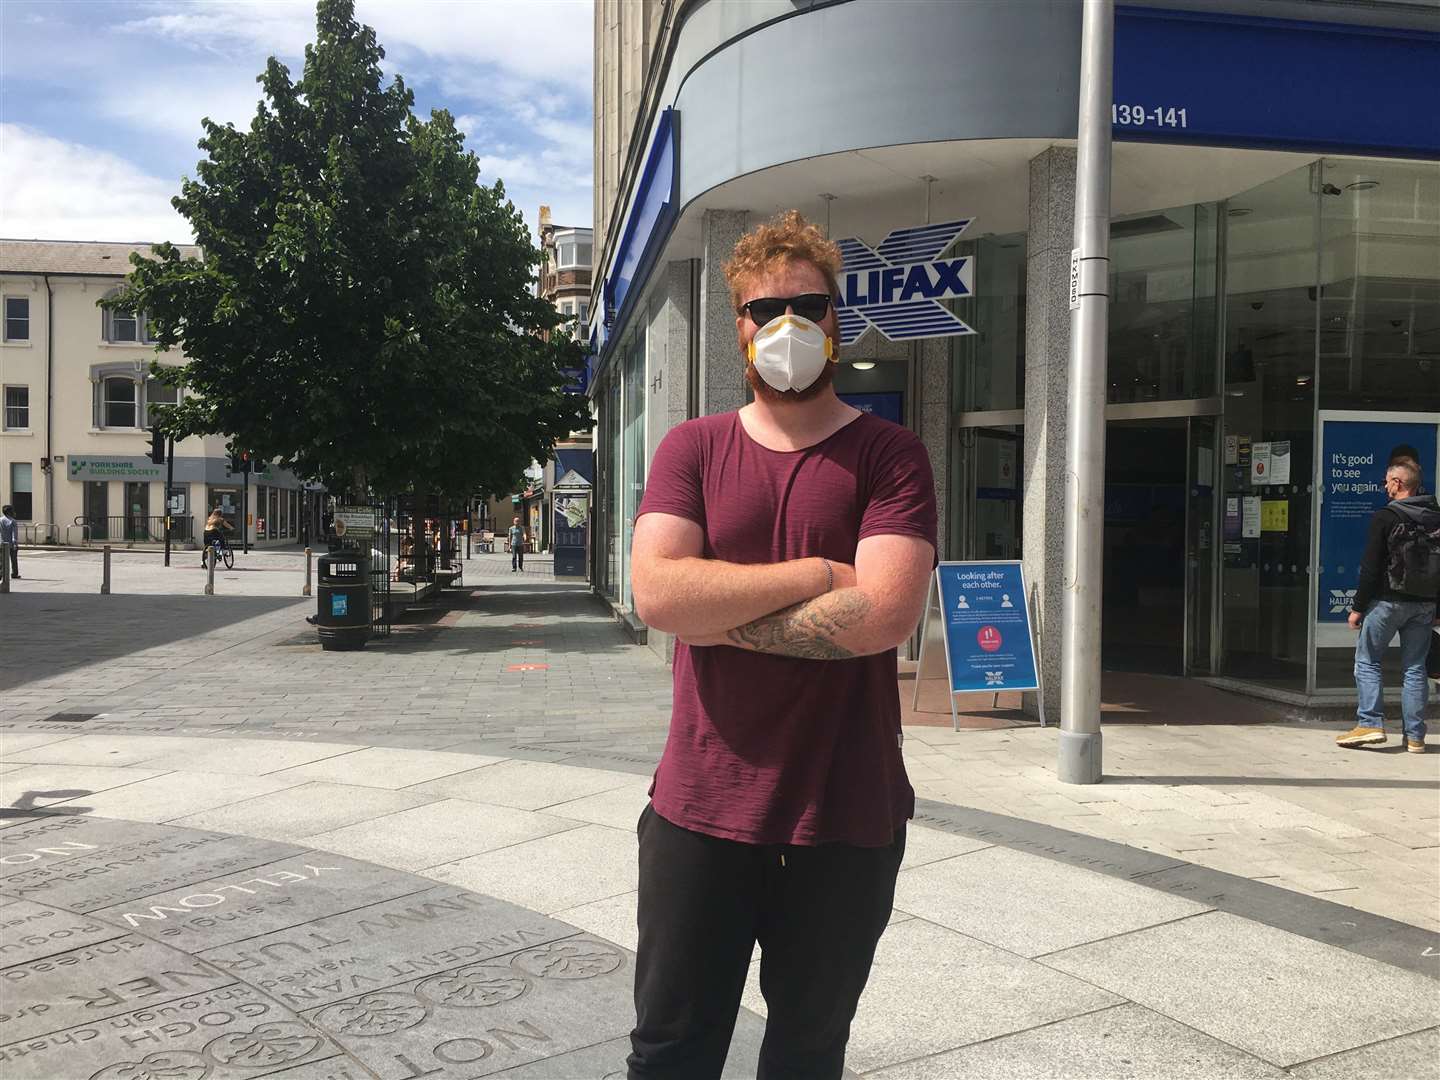 Chris Columb says people should be wearing masks in shops